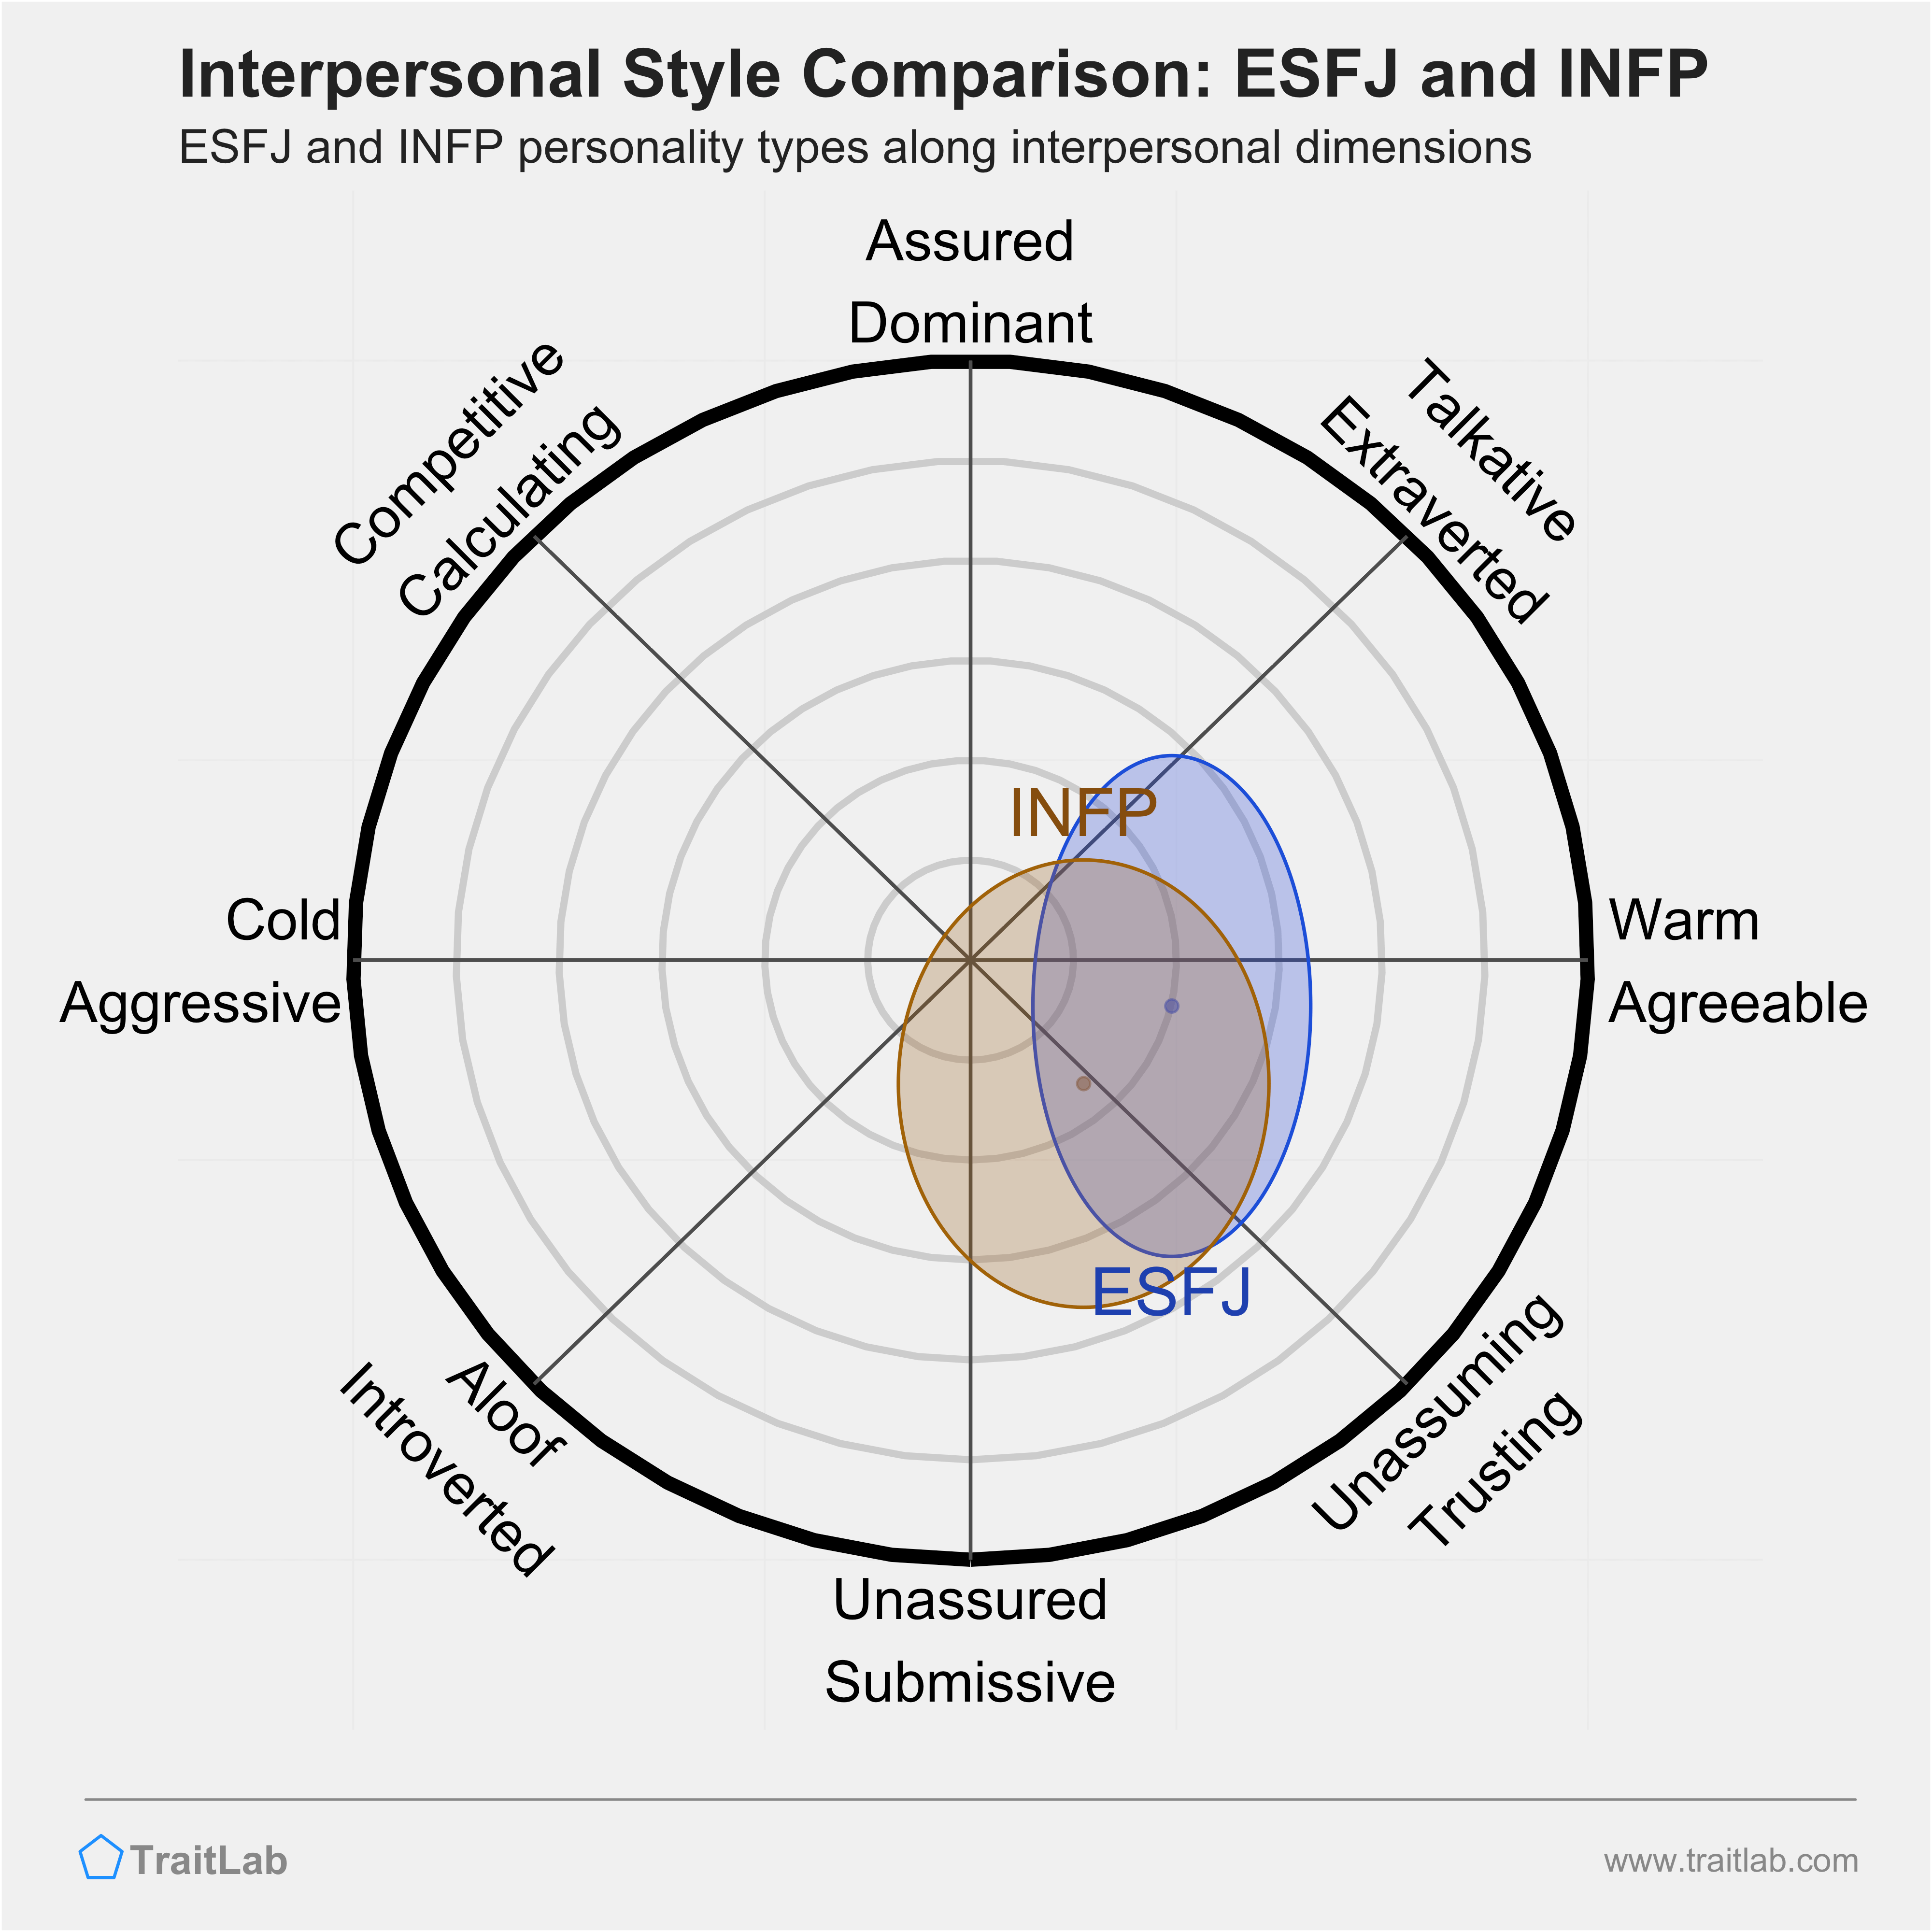 ESFJ and INFP comparison across interpersonal dimensions